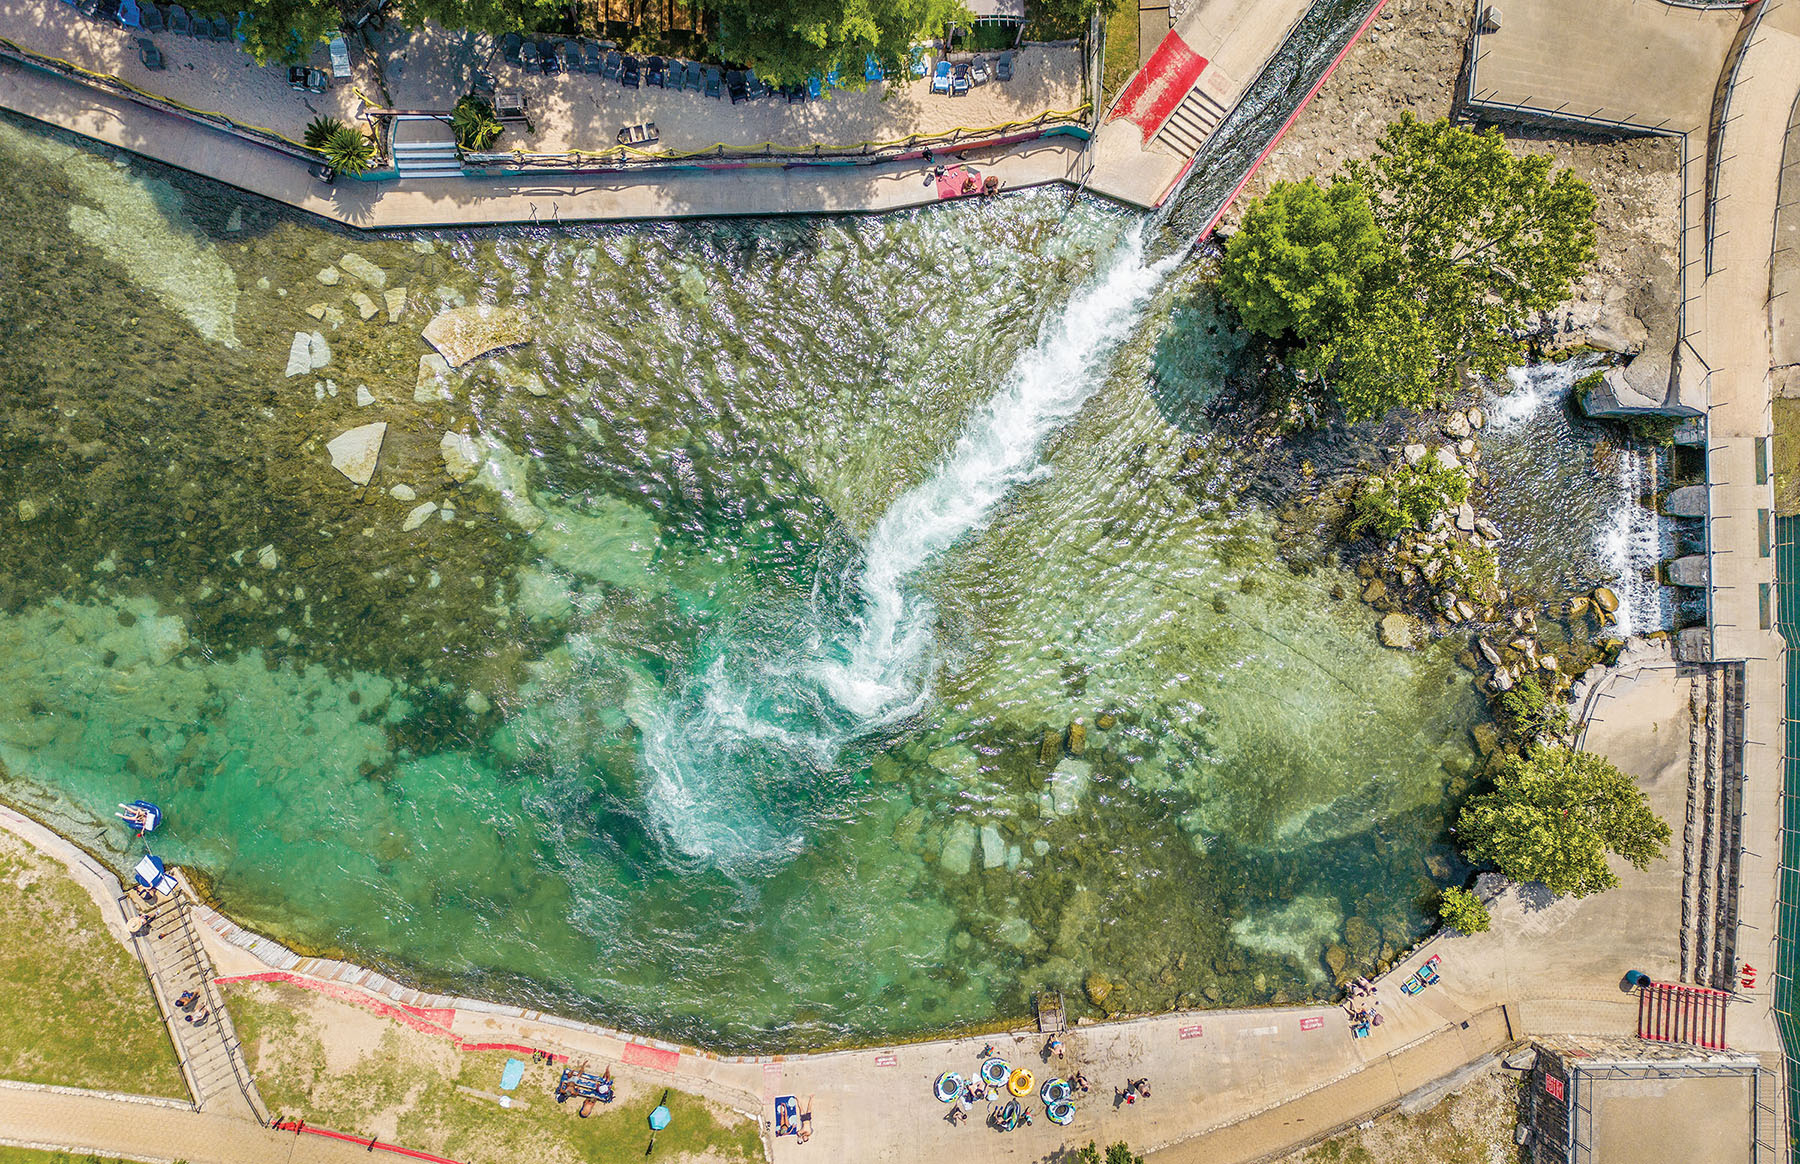 An overhead view of people swimming and relaxing in a spring-fed pool